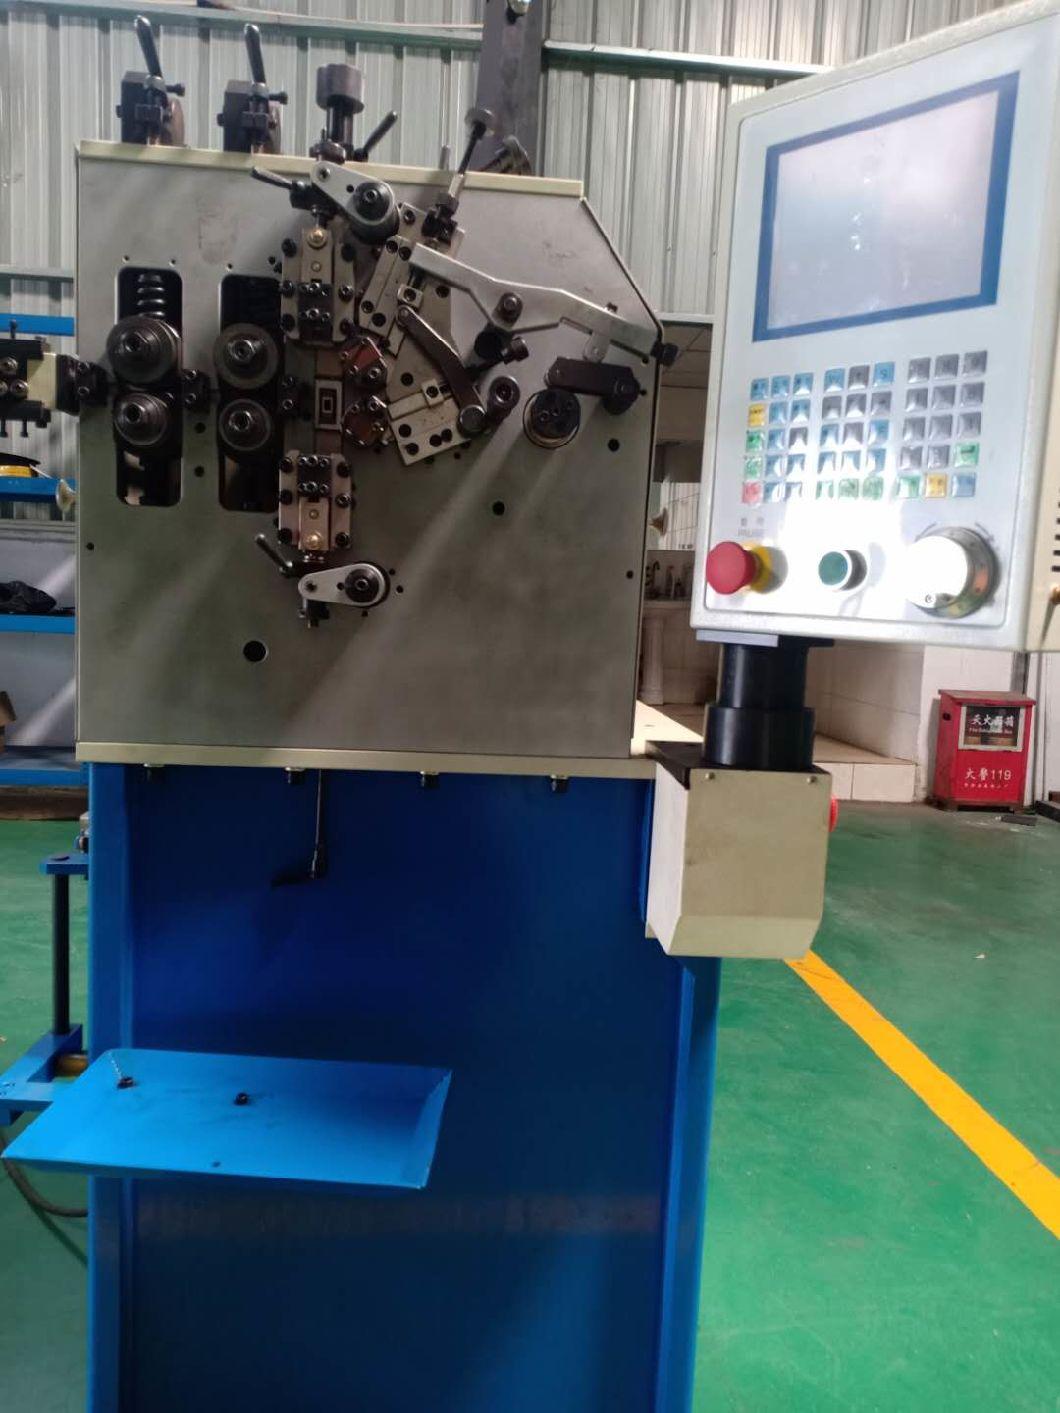 Compression Spring Making Machine with 2 Axis Lkx230